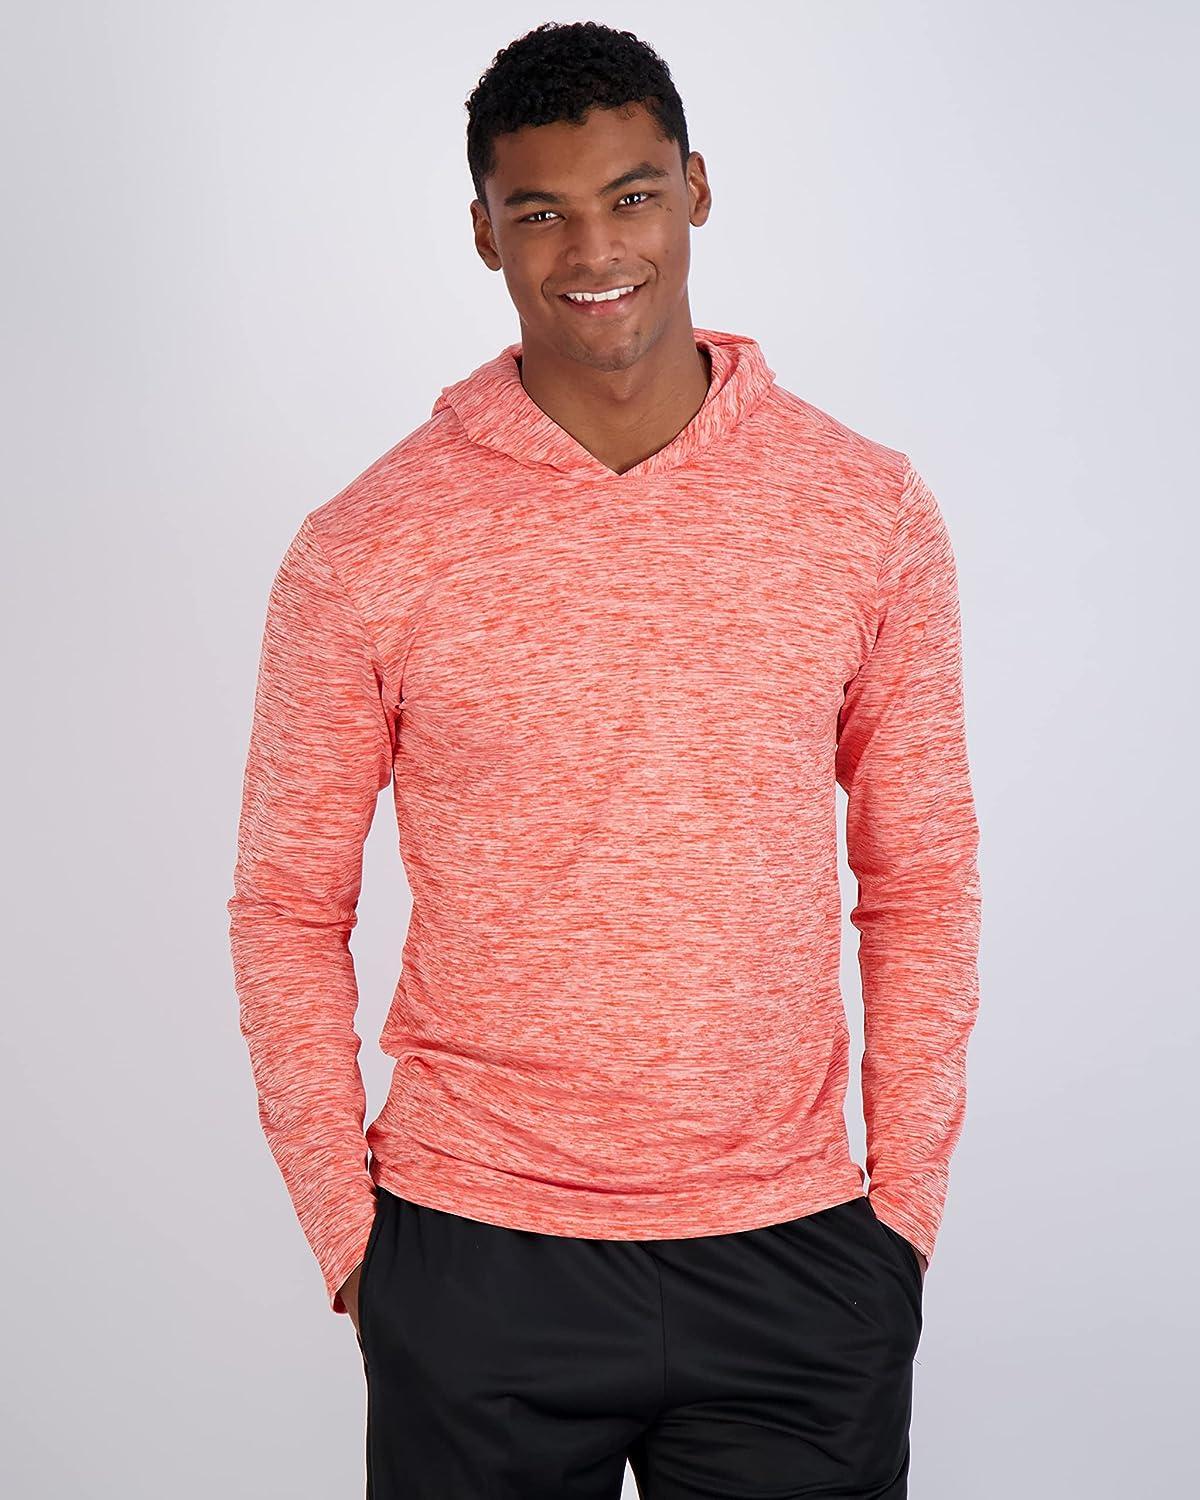 Real Essentials 3 Pack: Men's Dry Fit Moisture Wicking Long Sleeve